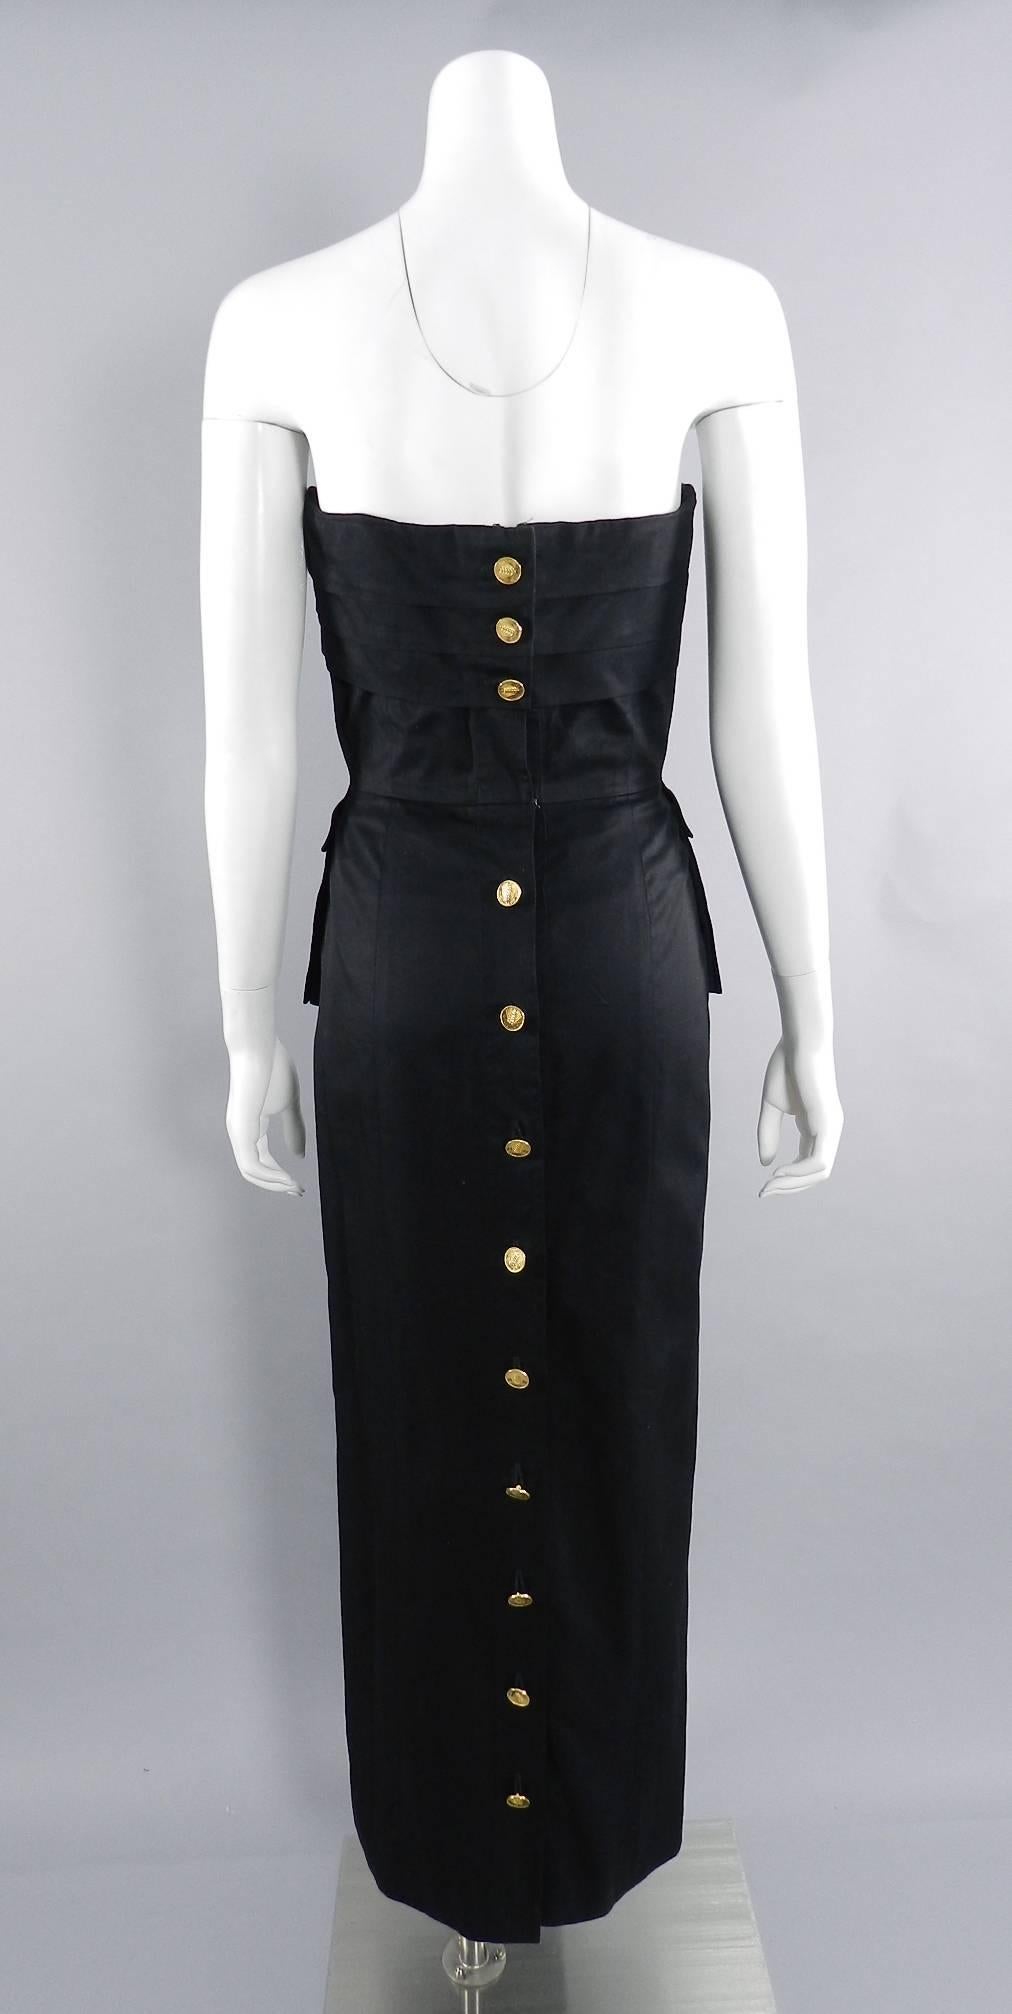 Chanel Vintage 1987 Black Strapless Cotton Dress with Wheat Buttons.  Boned corseted bodice, fastens down back with gold buttons, and has peplum side pockets. Excellent vintage condition. Size tag has been removed but is a FR 40 (USA 8). Garment